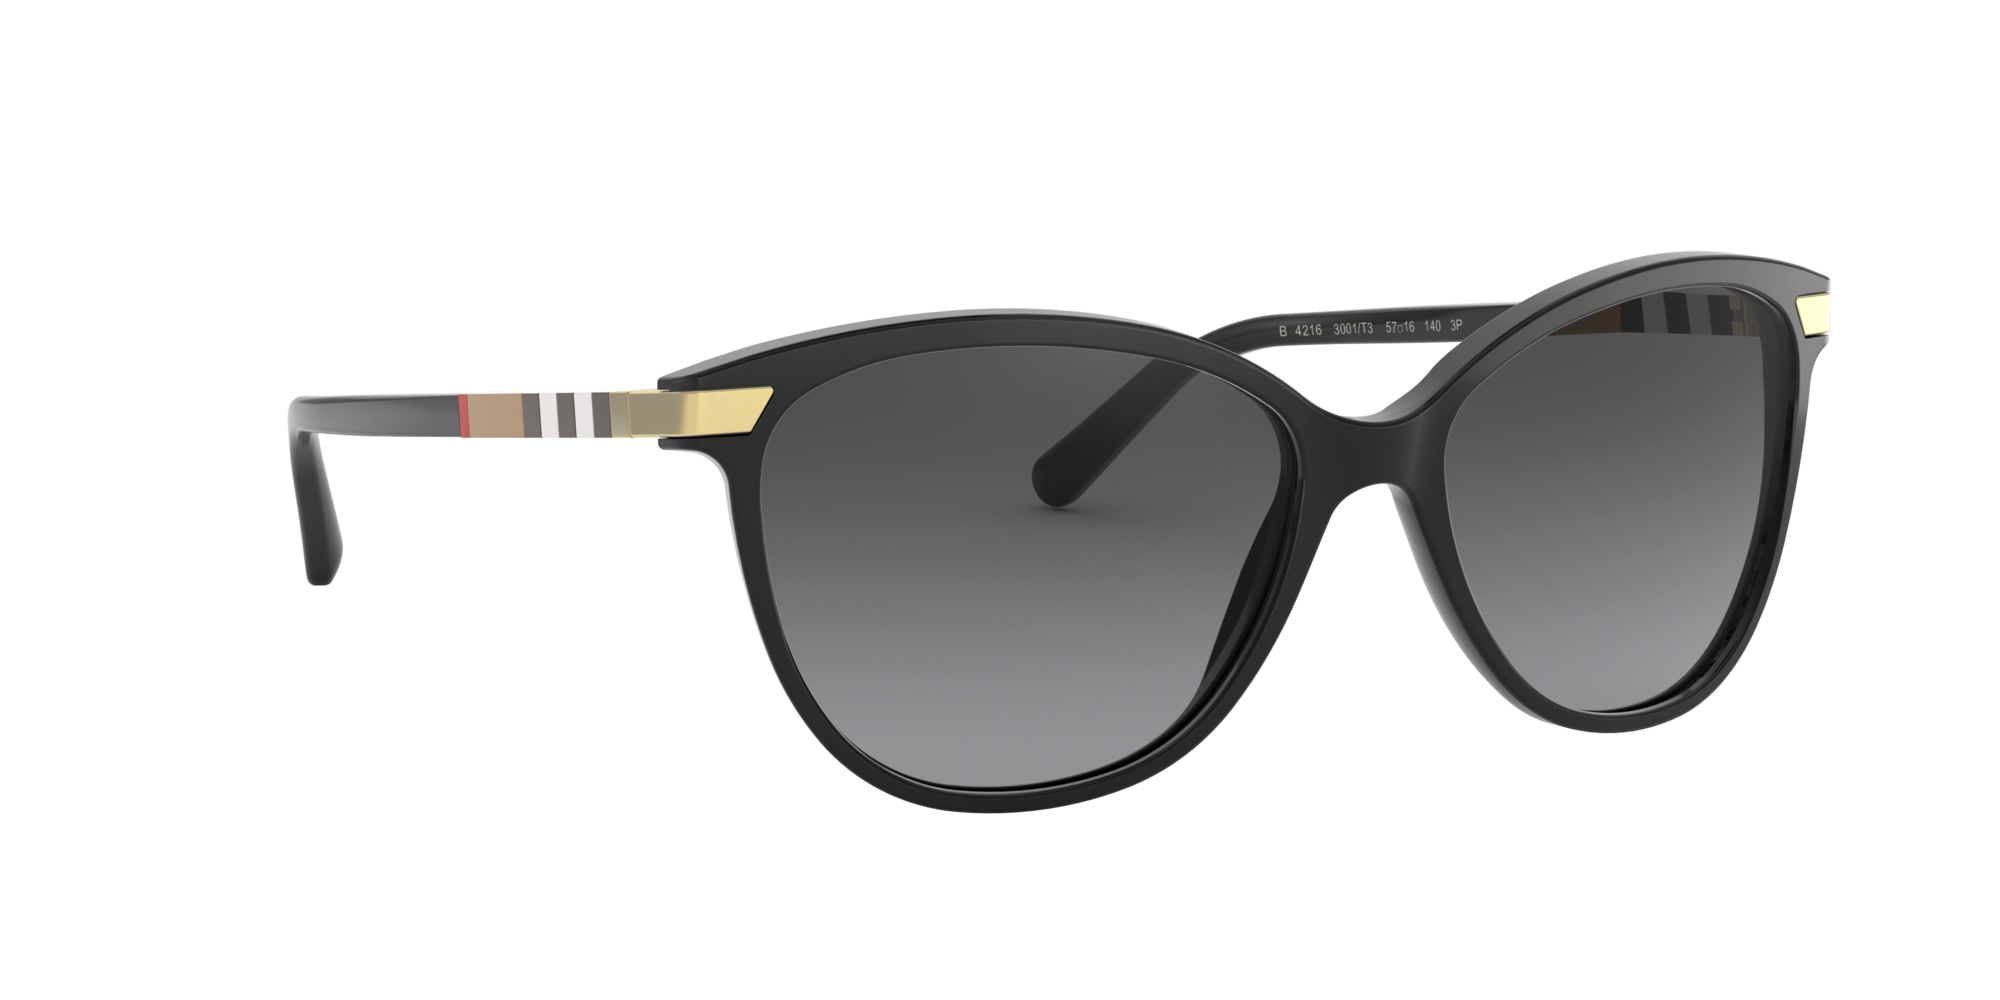 Angle_Right01 Burberry BE 4216 (3001T3) Sunglasses Grey / Black